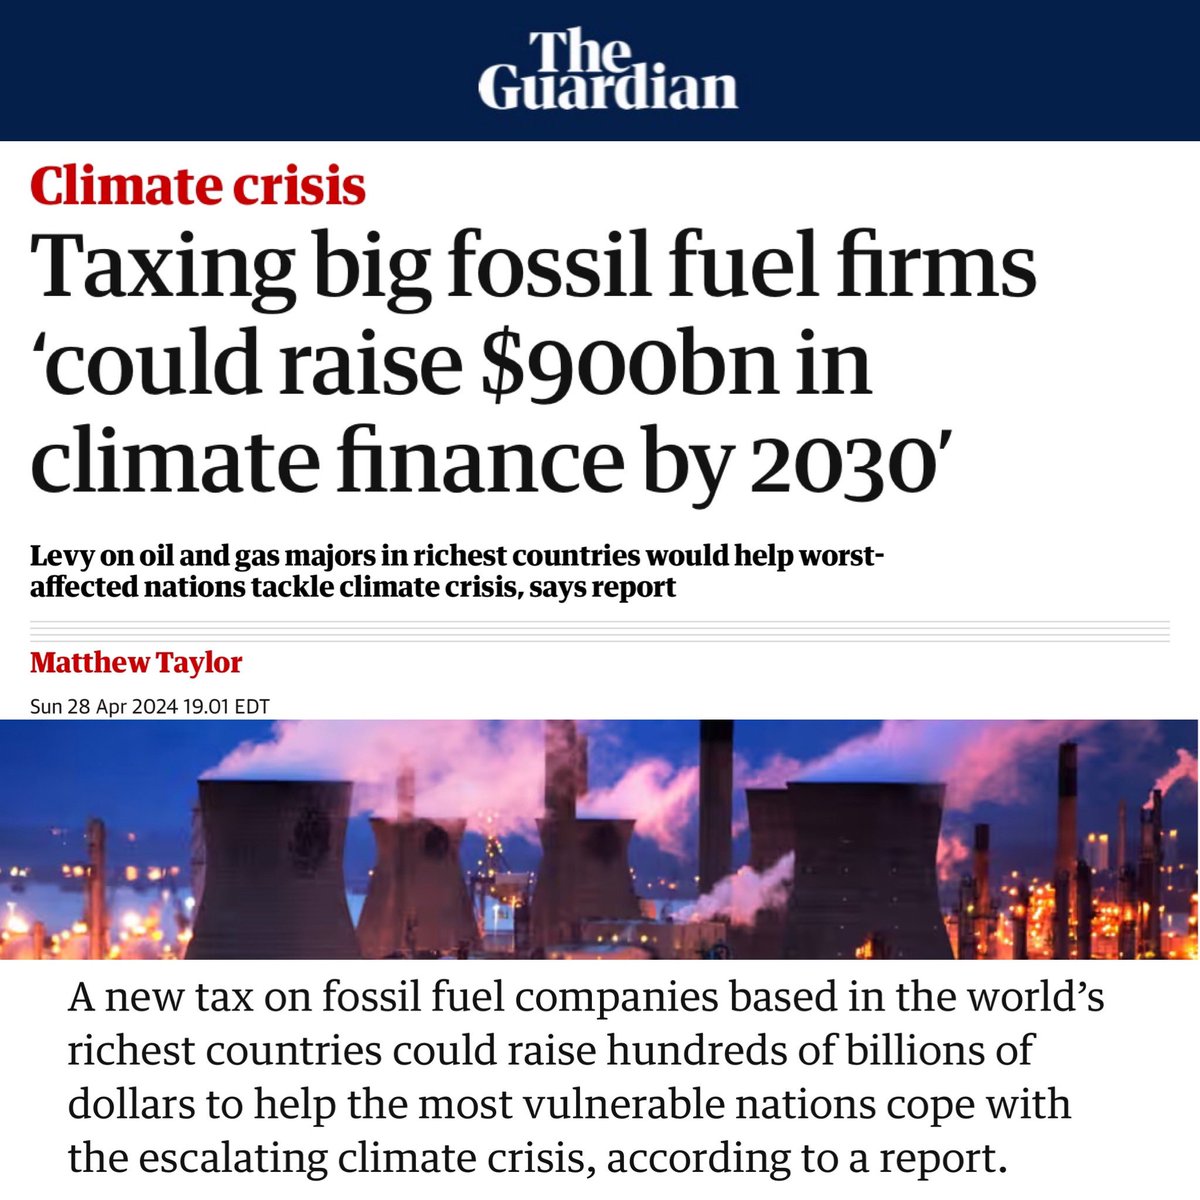 “bUt HoW wiLL wE PaY For iT?” can usually be answered with “by making corporations and billionaires pay their fair share.” Climate action is necessary, morally and fiscally responsible, and should be paid for by the corporations causing the crisis.